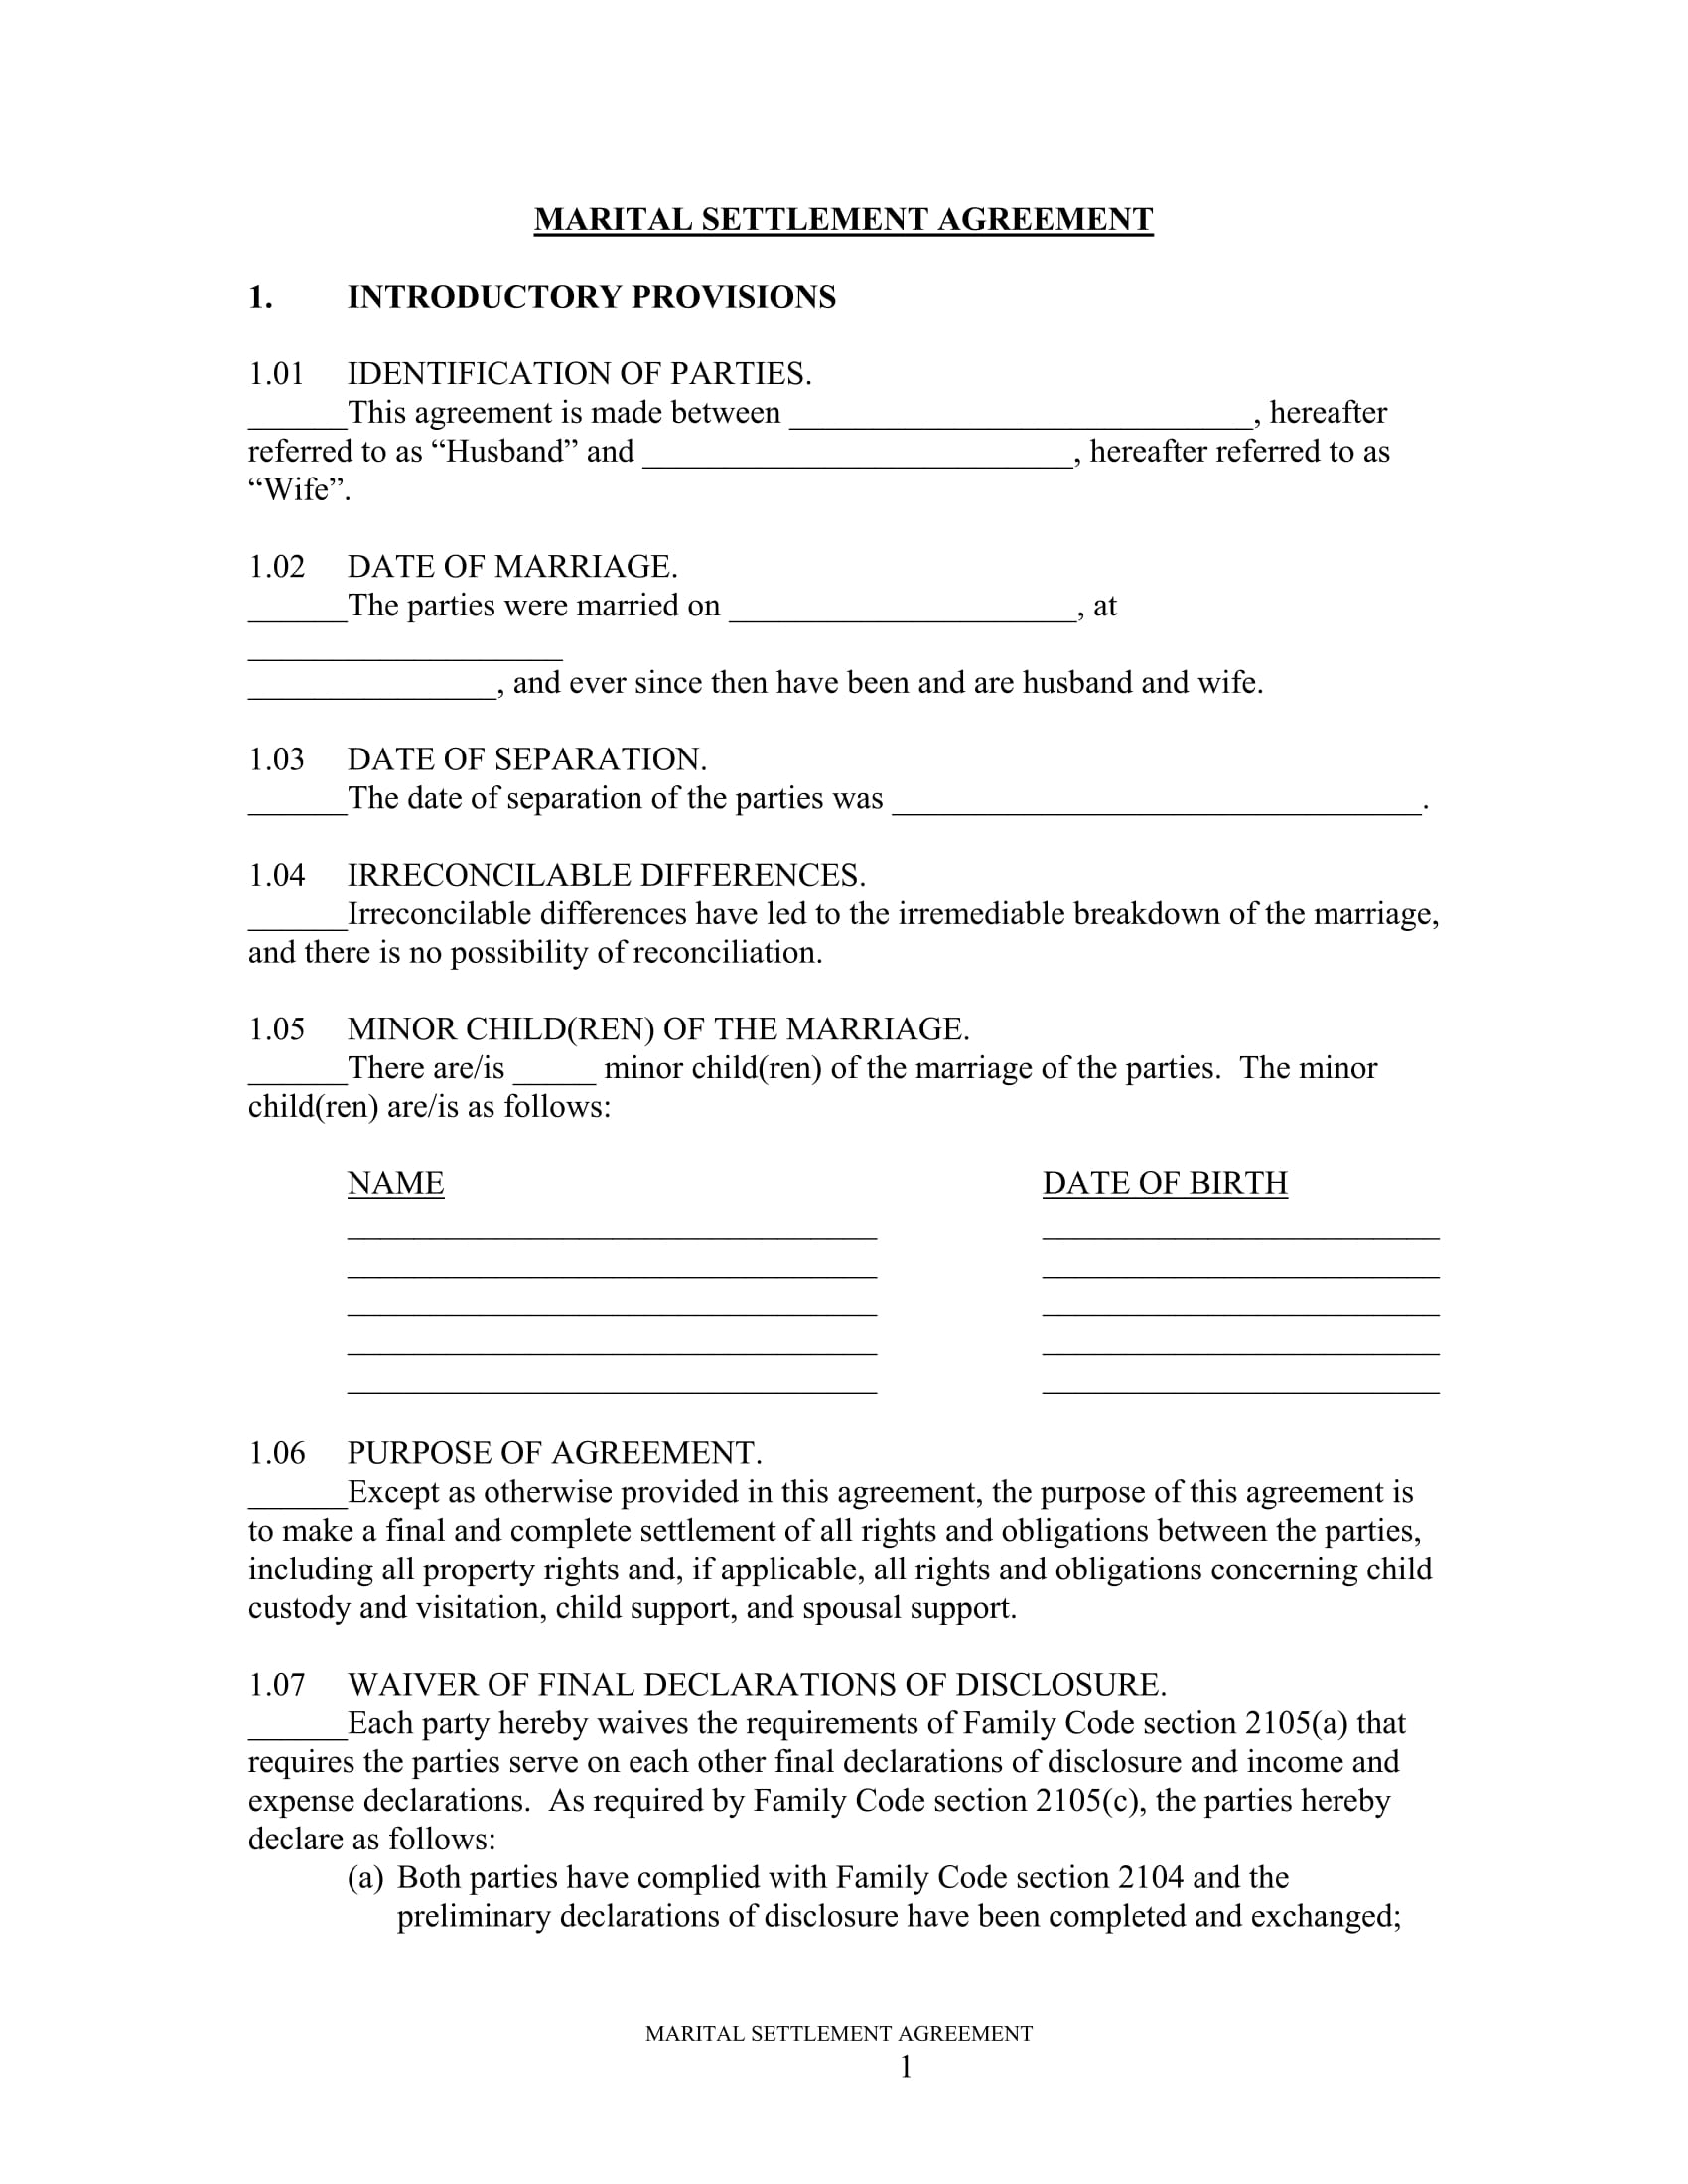 Marriage Termination Agreement 5 Marriage Agreement Forms Prenuptial Agreement Cohabitation